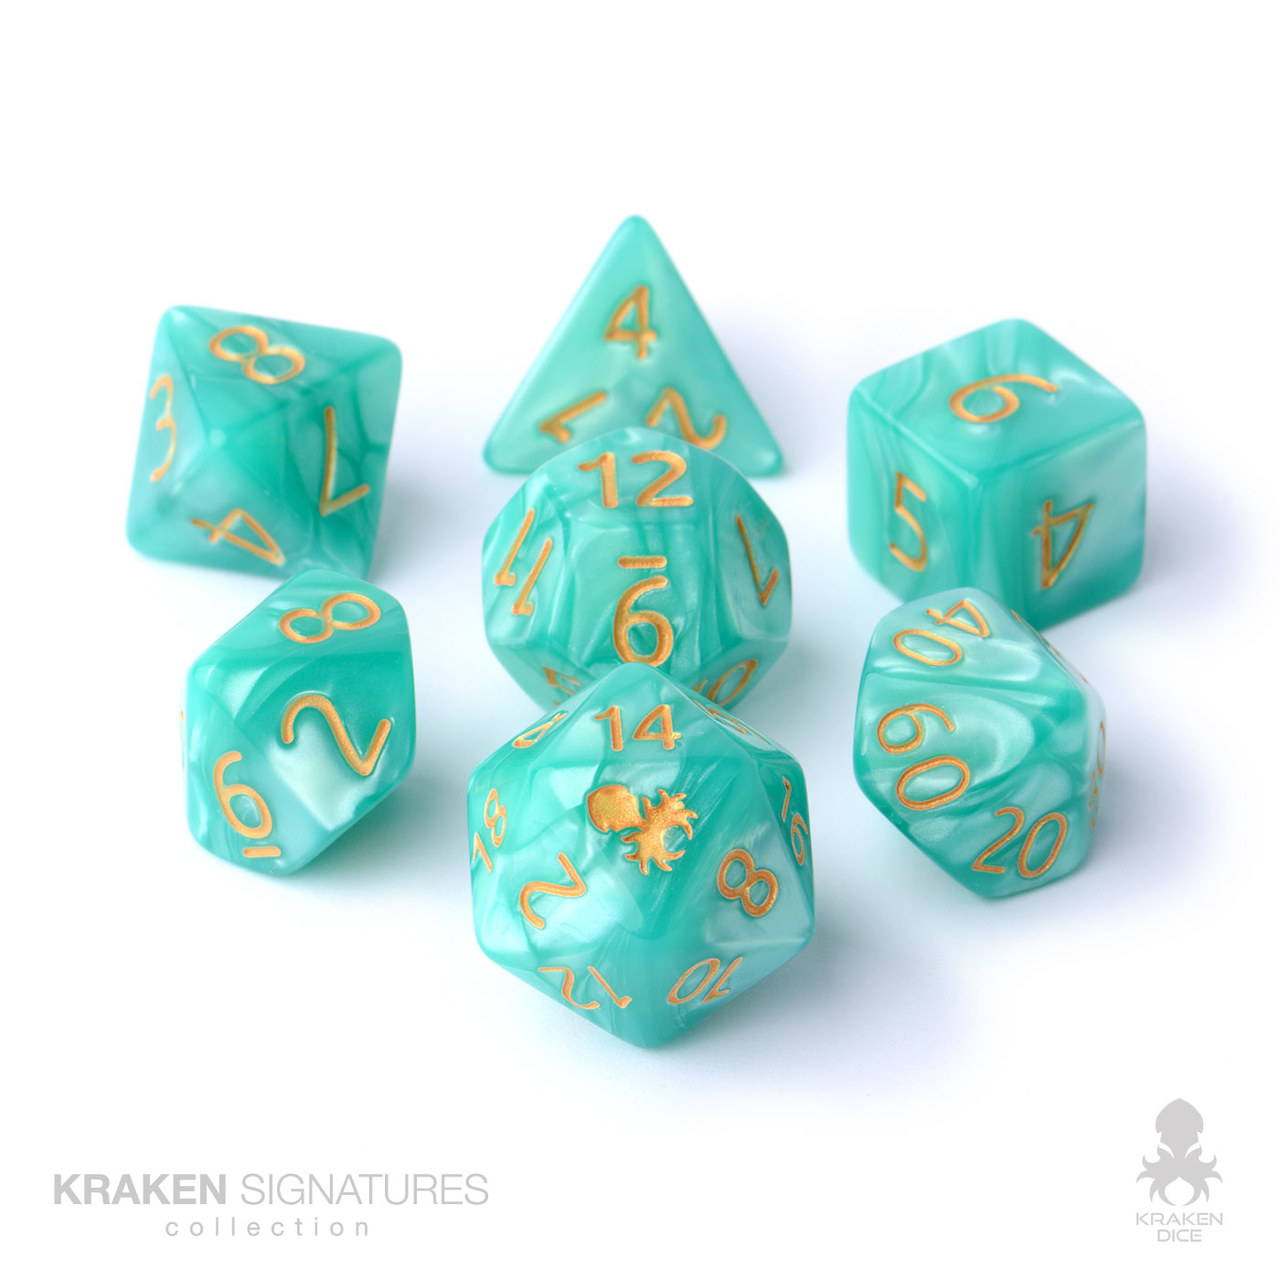 DND dice that are mint green and shiny.